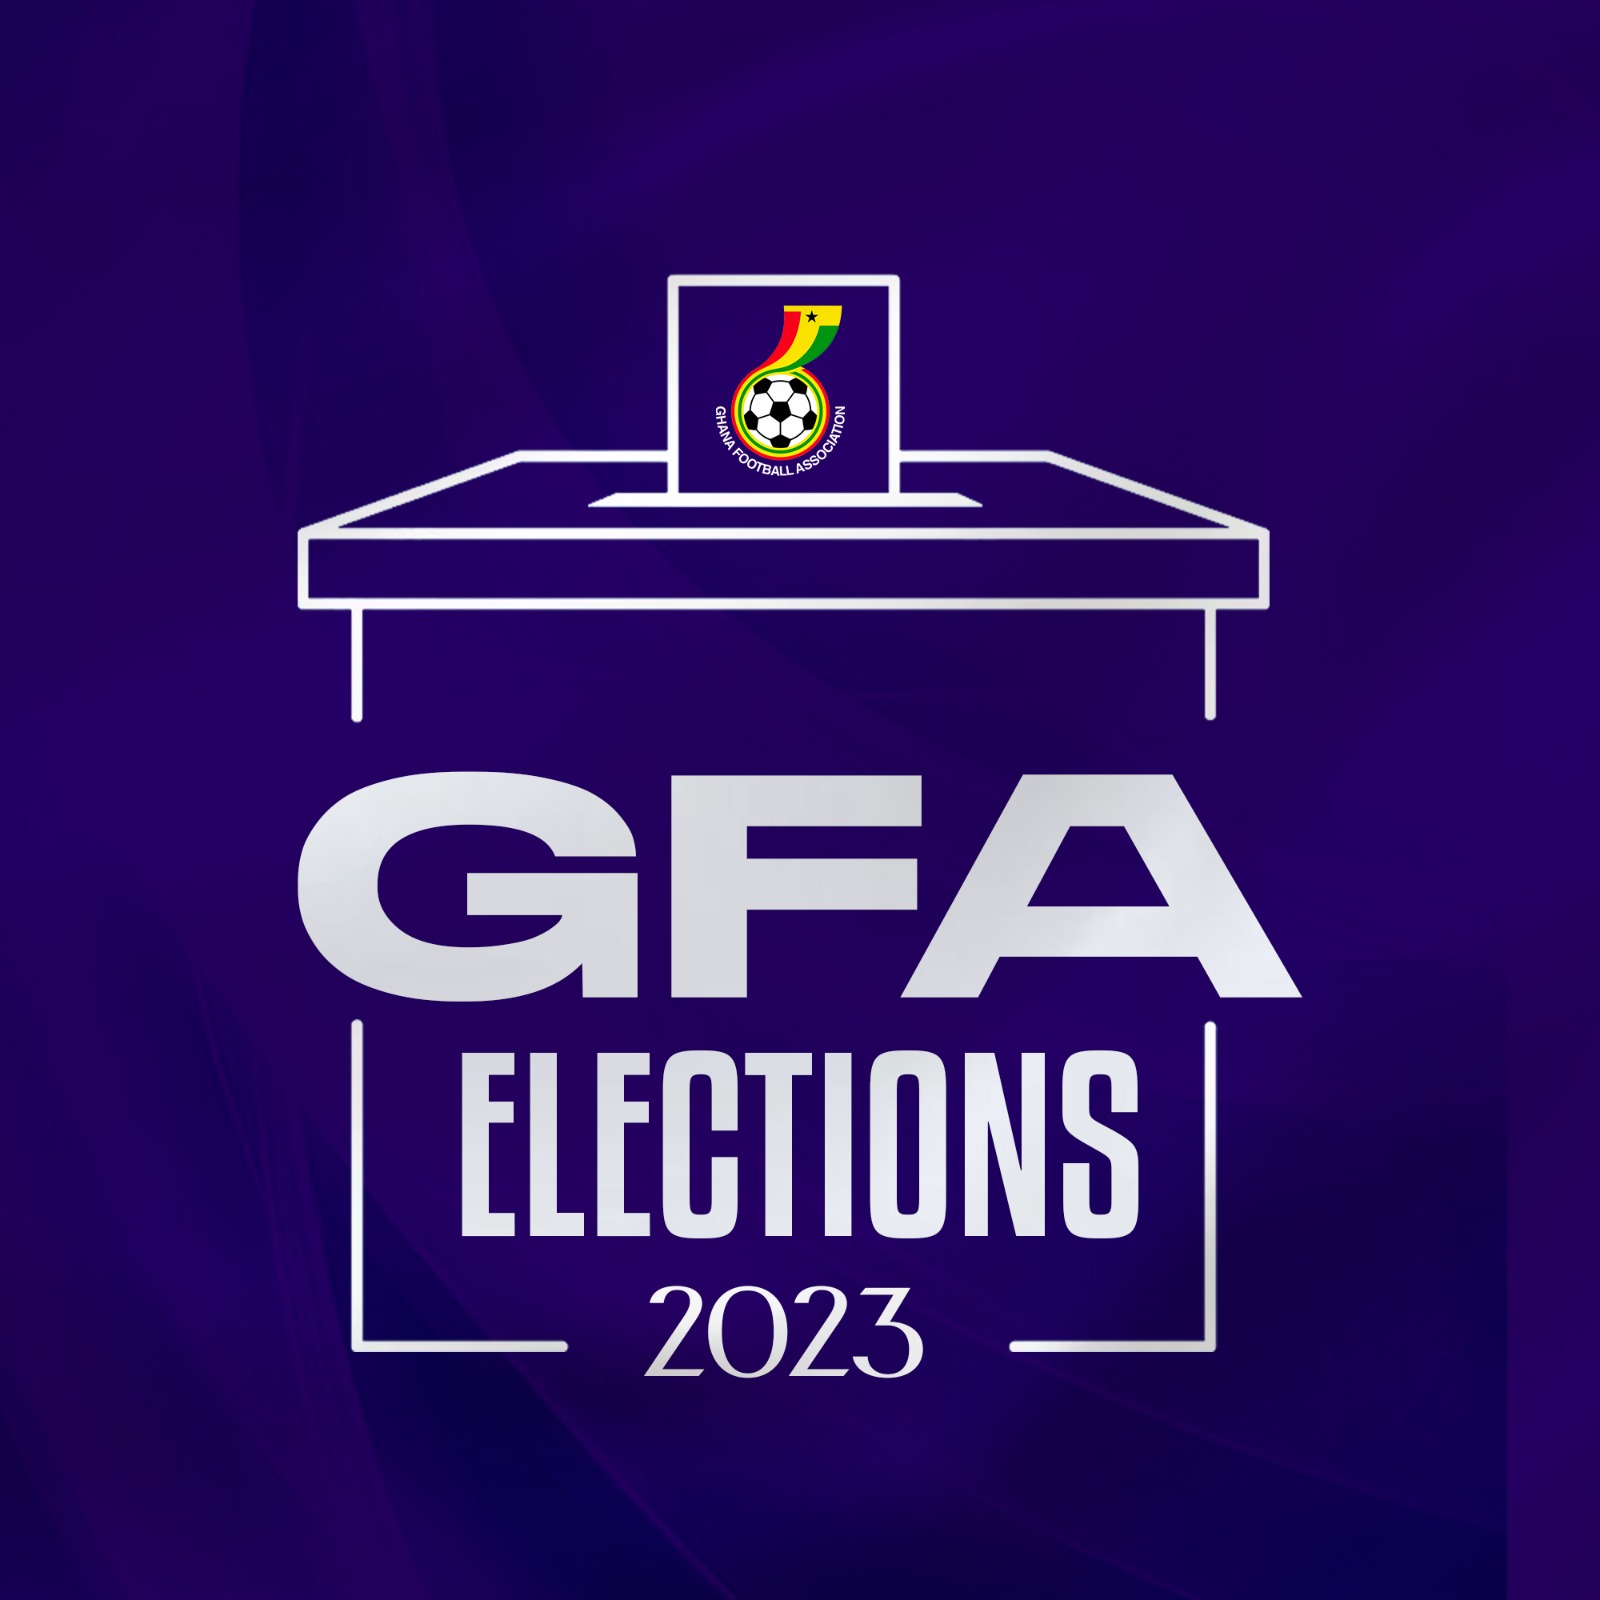 Elections Committee announce official list of candidates for 2023 GFA Elections